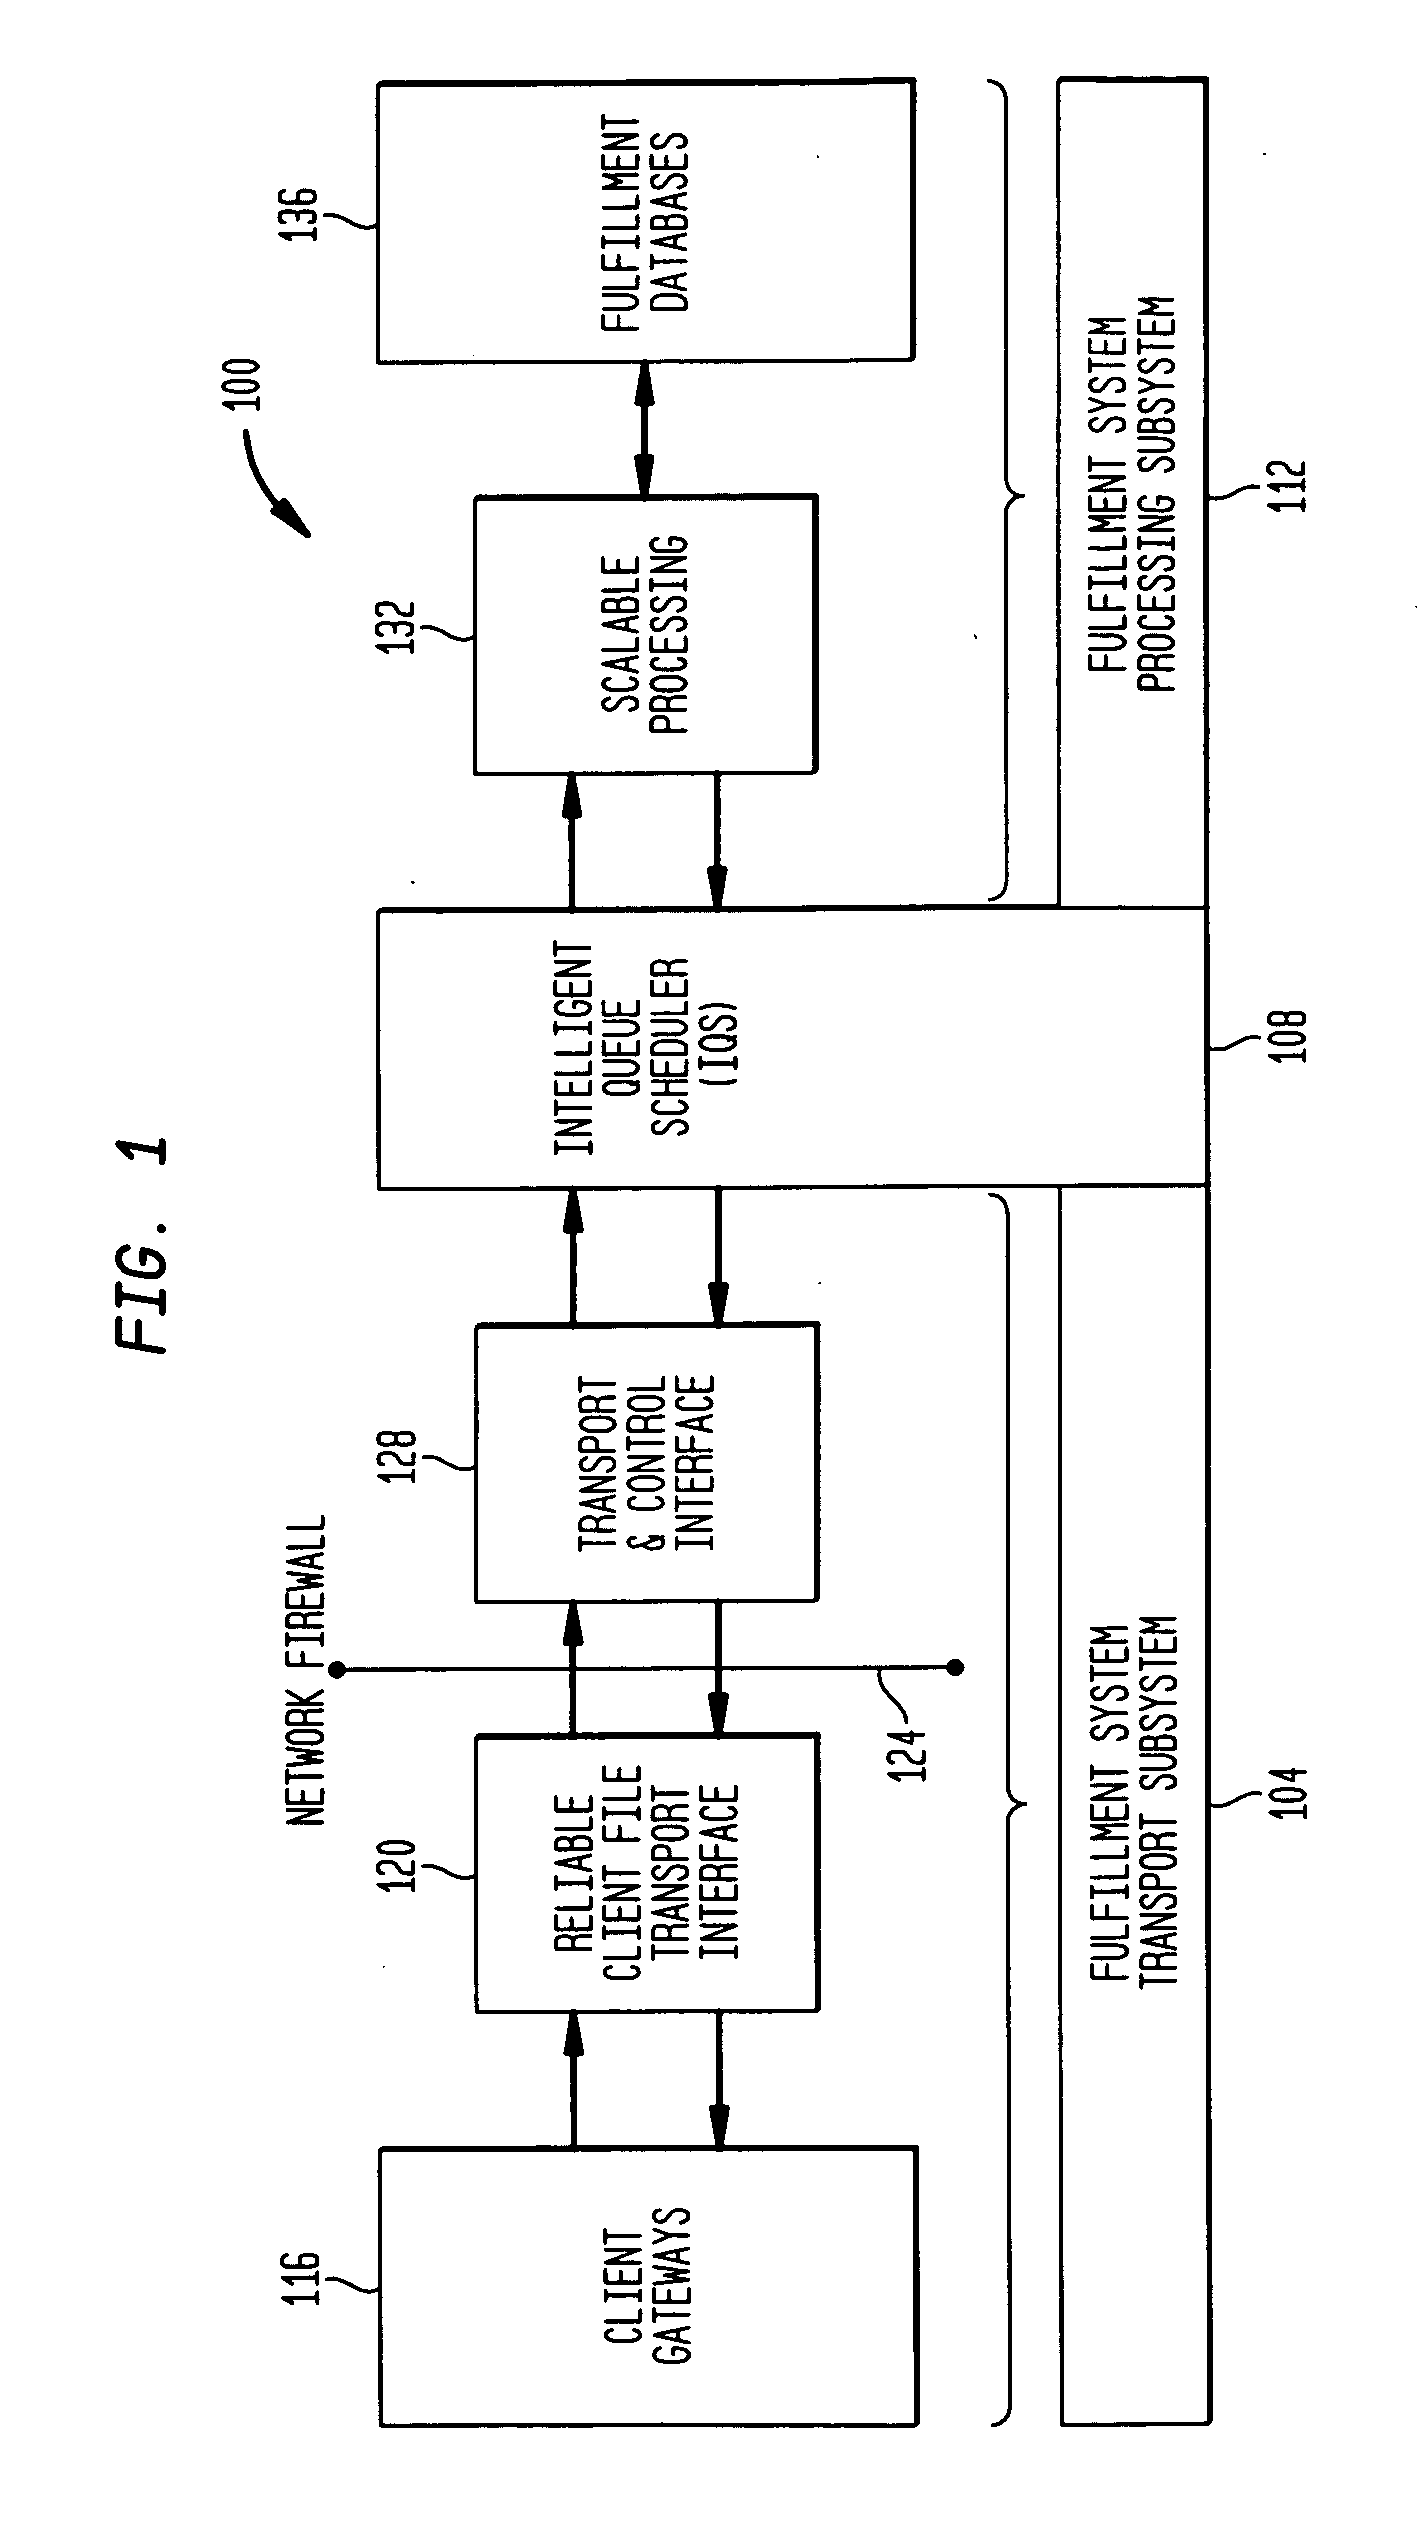 Method and apparatus for scalable transport processing fulfillment system